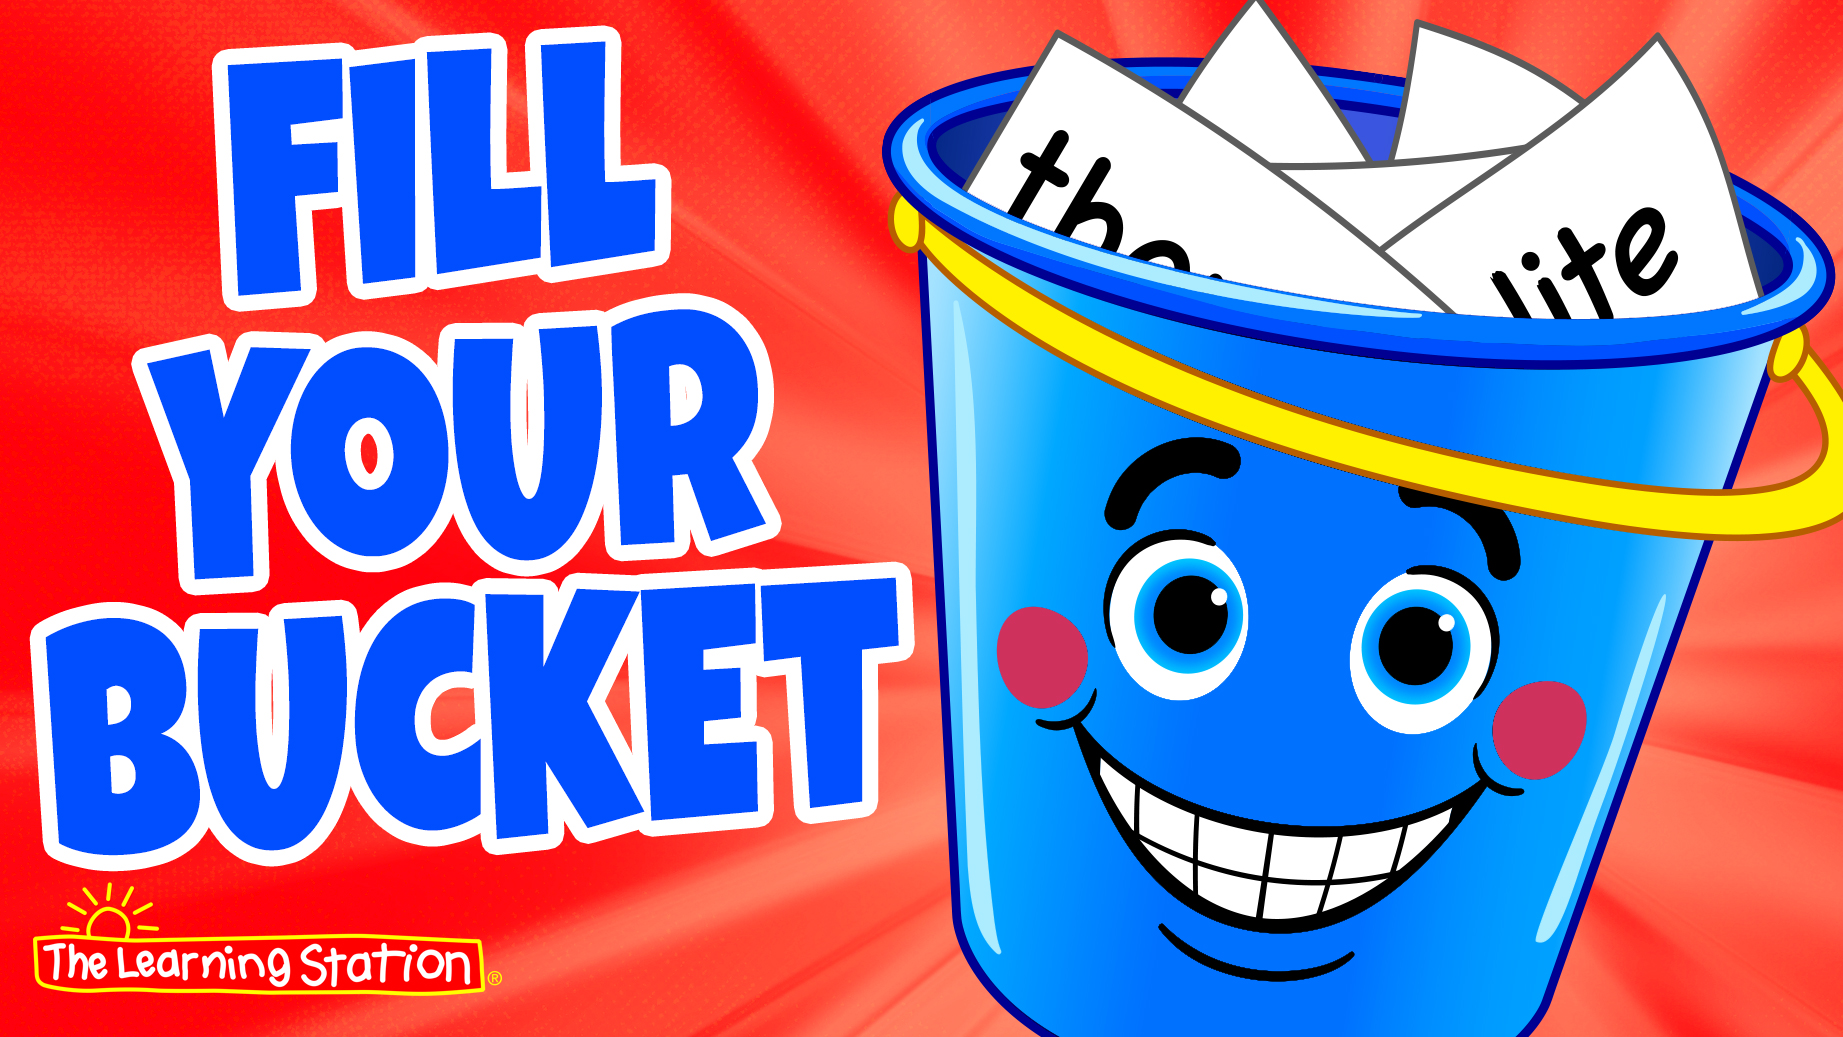 Fill Your Bucket | The Learning Station